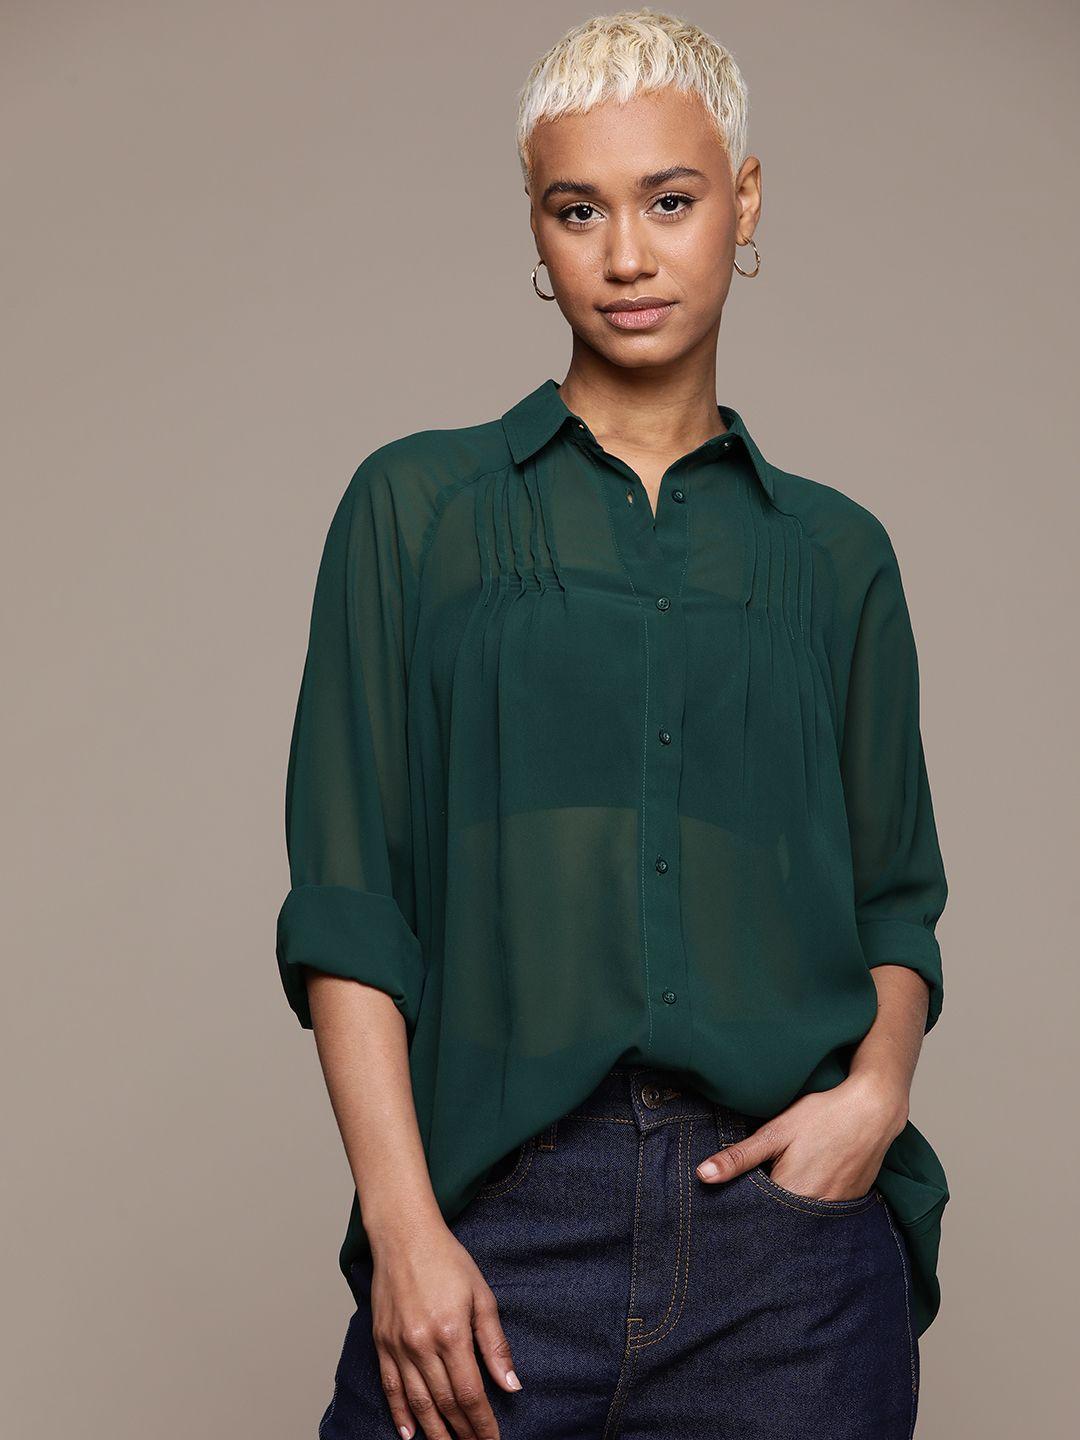 the roadster lifestyle co. sheer spread collar pleated detail shirt